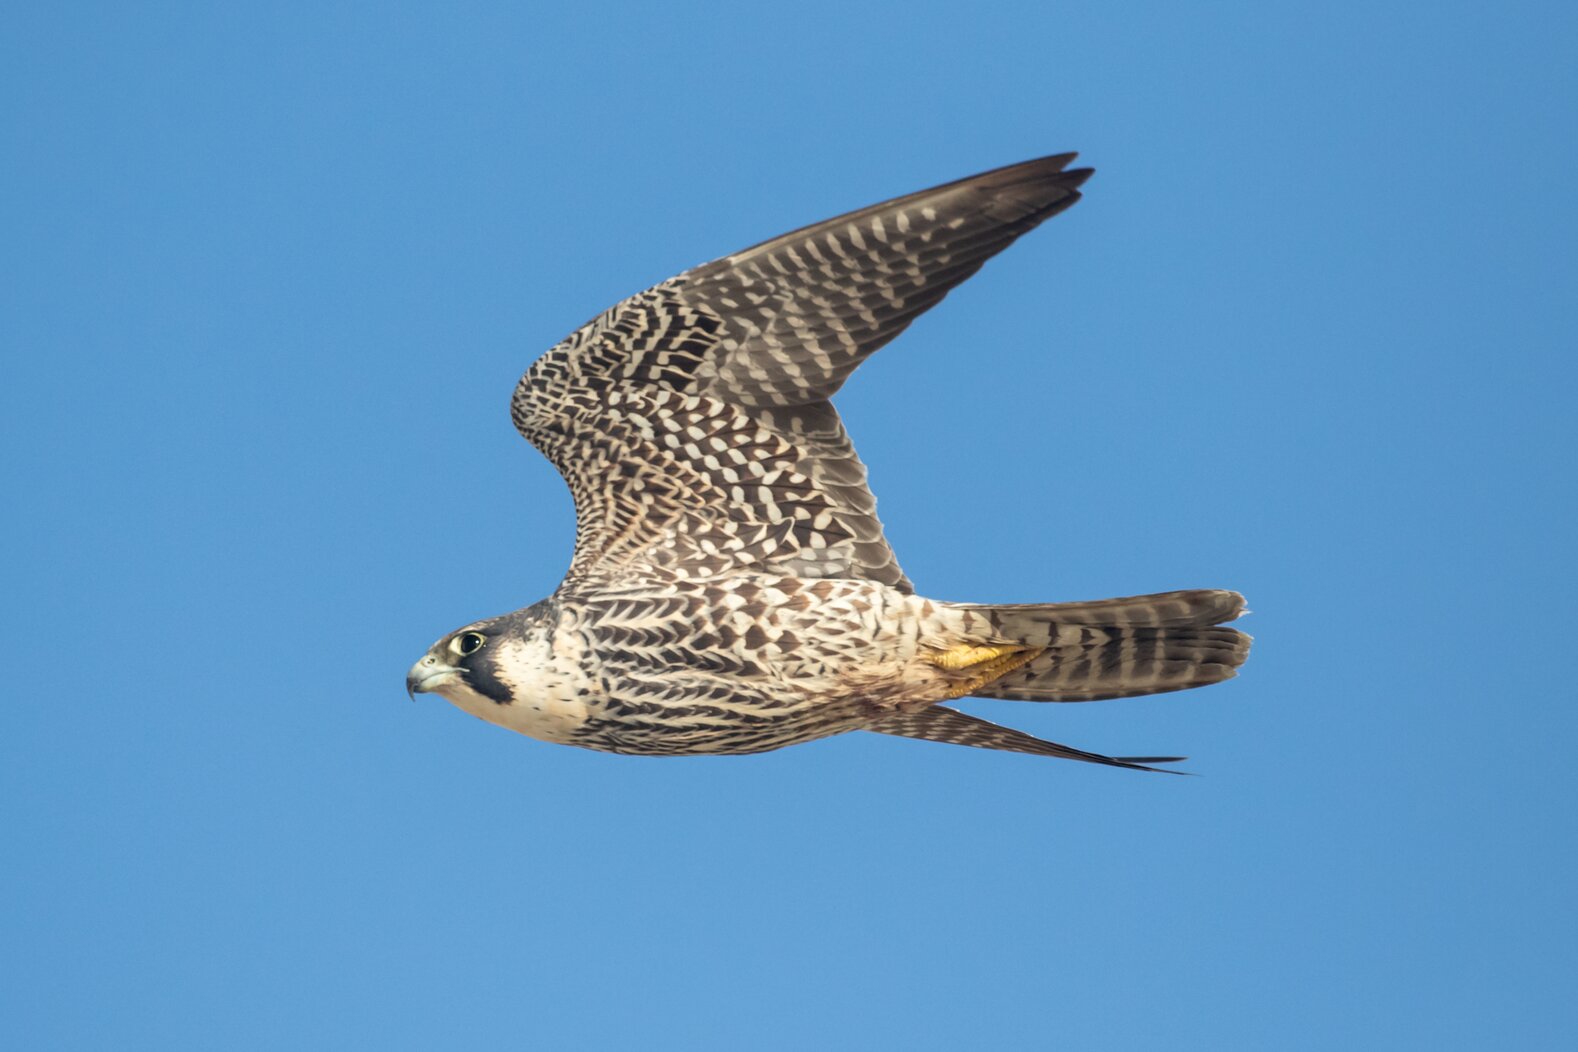 Peregrine Falcons are often spotted hunting after shorebirds, gulls, and waterfowl at Coney Island Beach. Photo: Ryan F. Mandelbaum